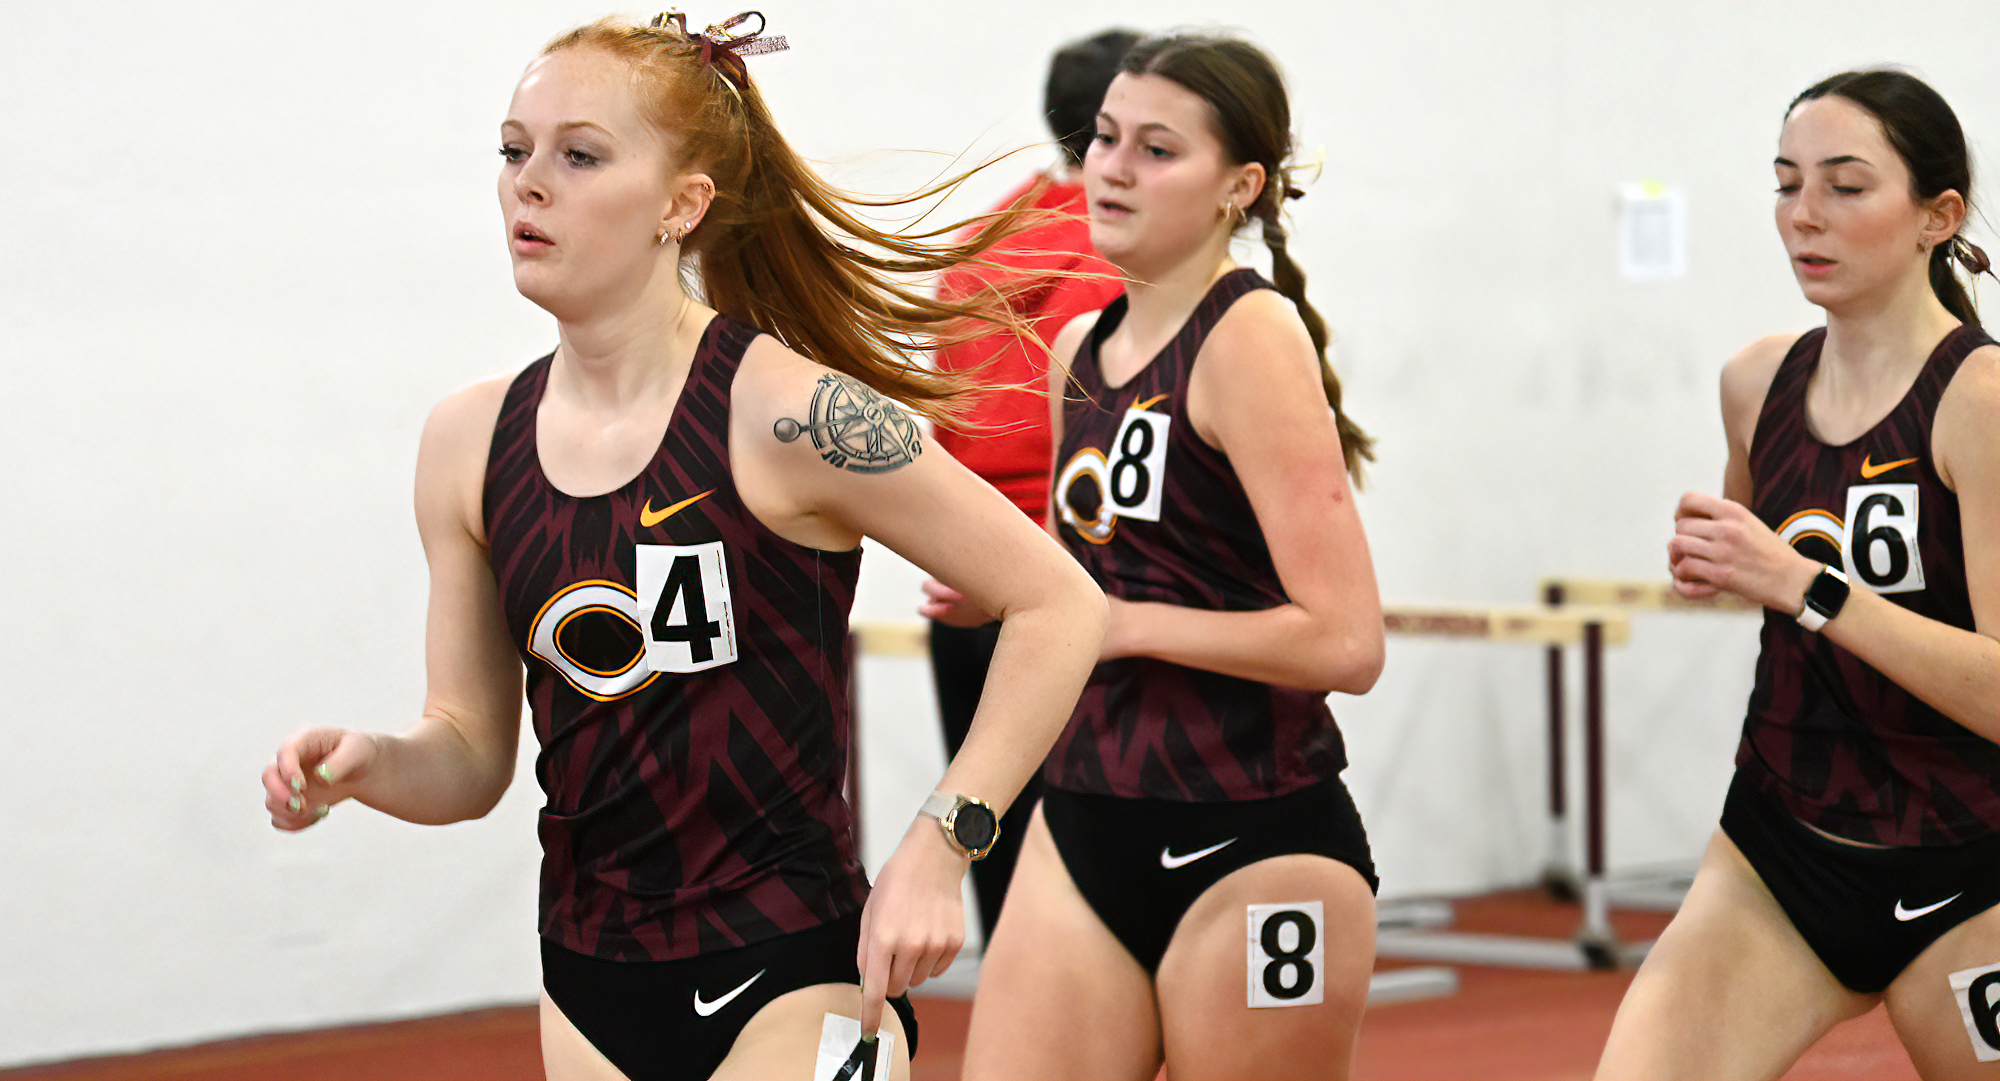 Airial Johnson (L) leads a trio of Cobber runners in the mile at the Cobber Open. Johnson won the event with a personal-best time of 5:49.93.